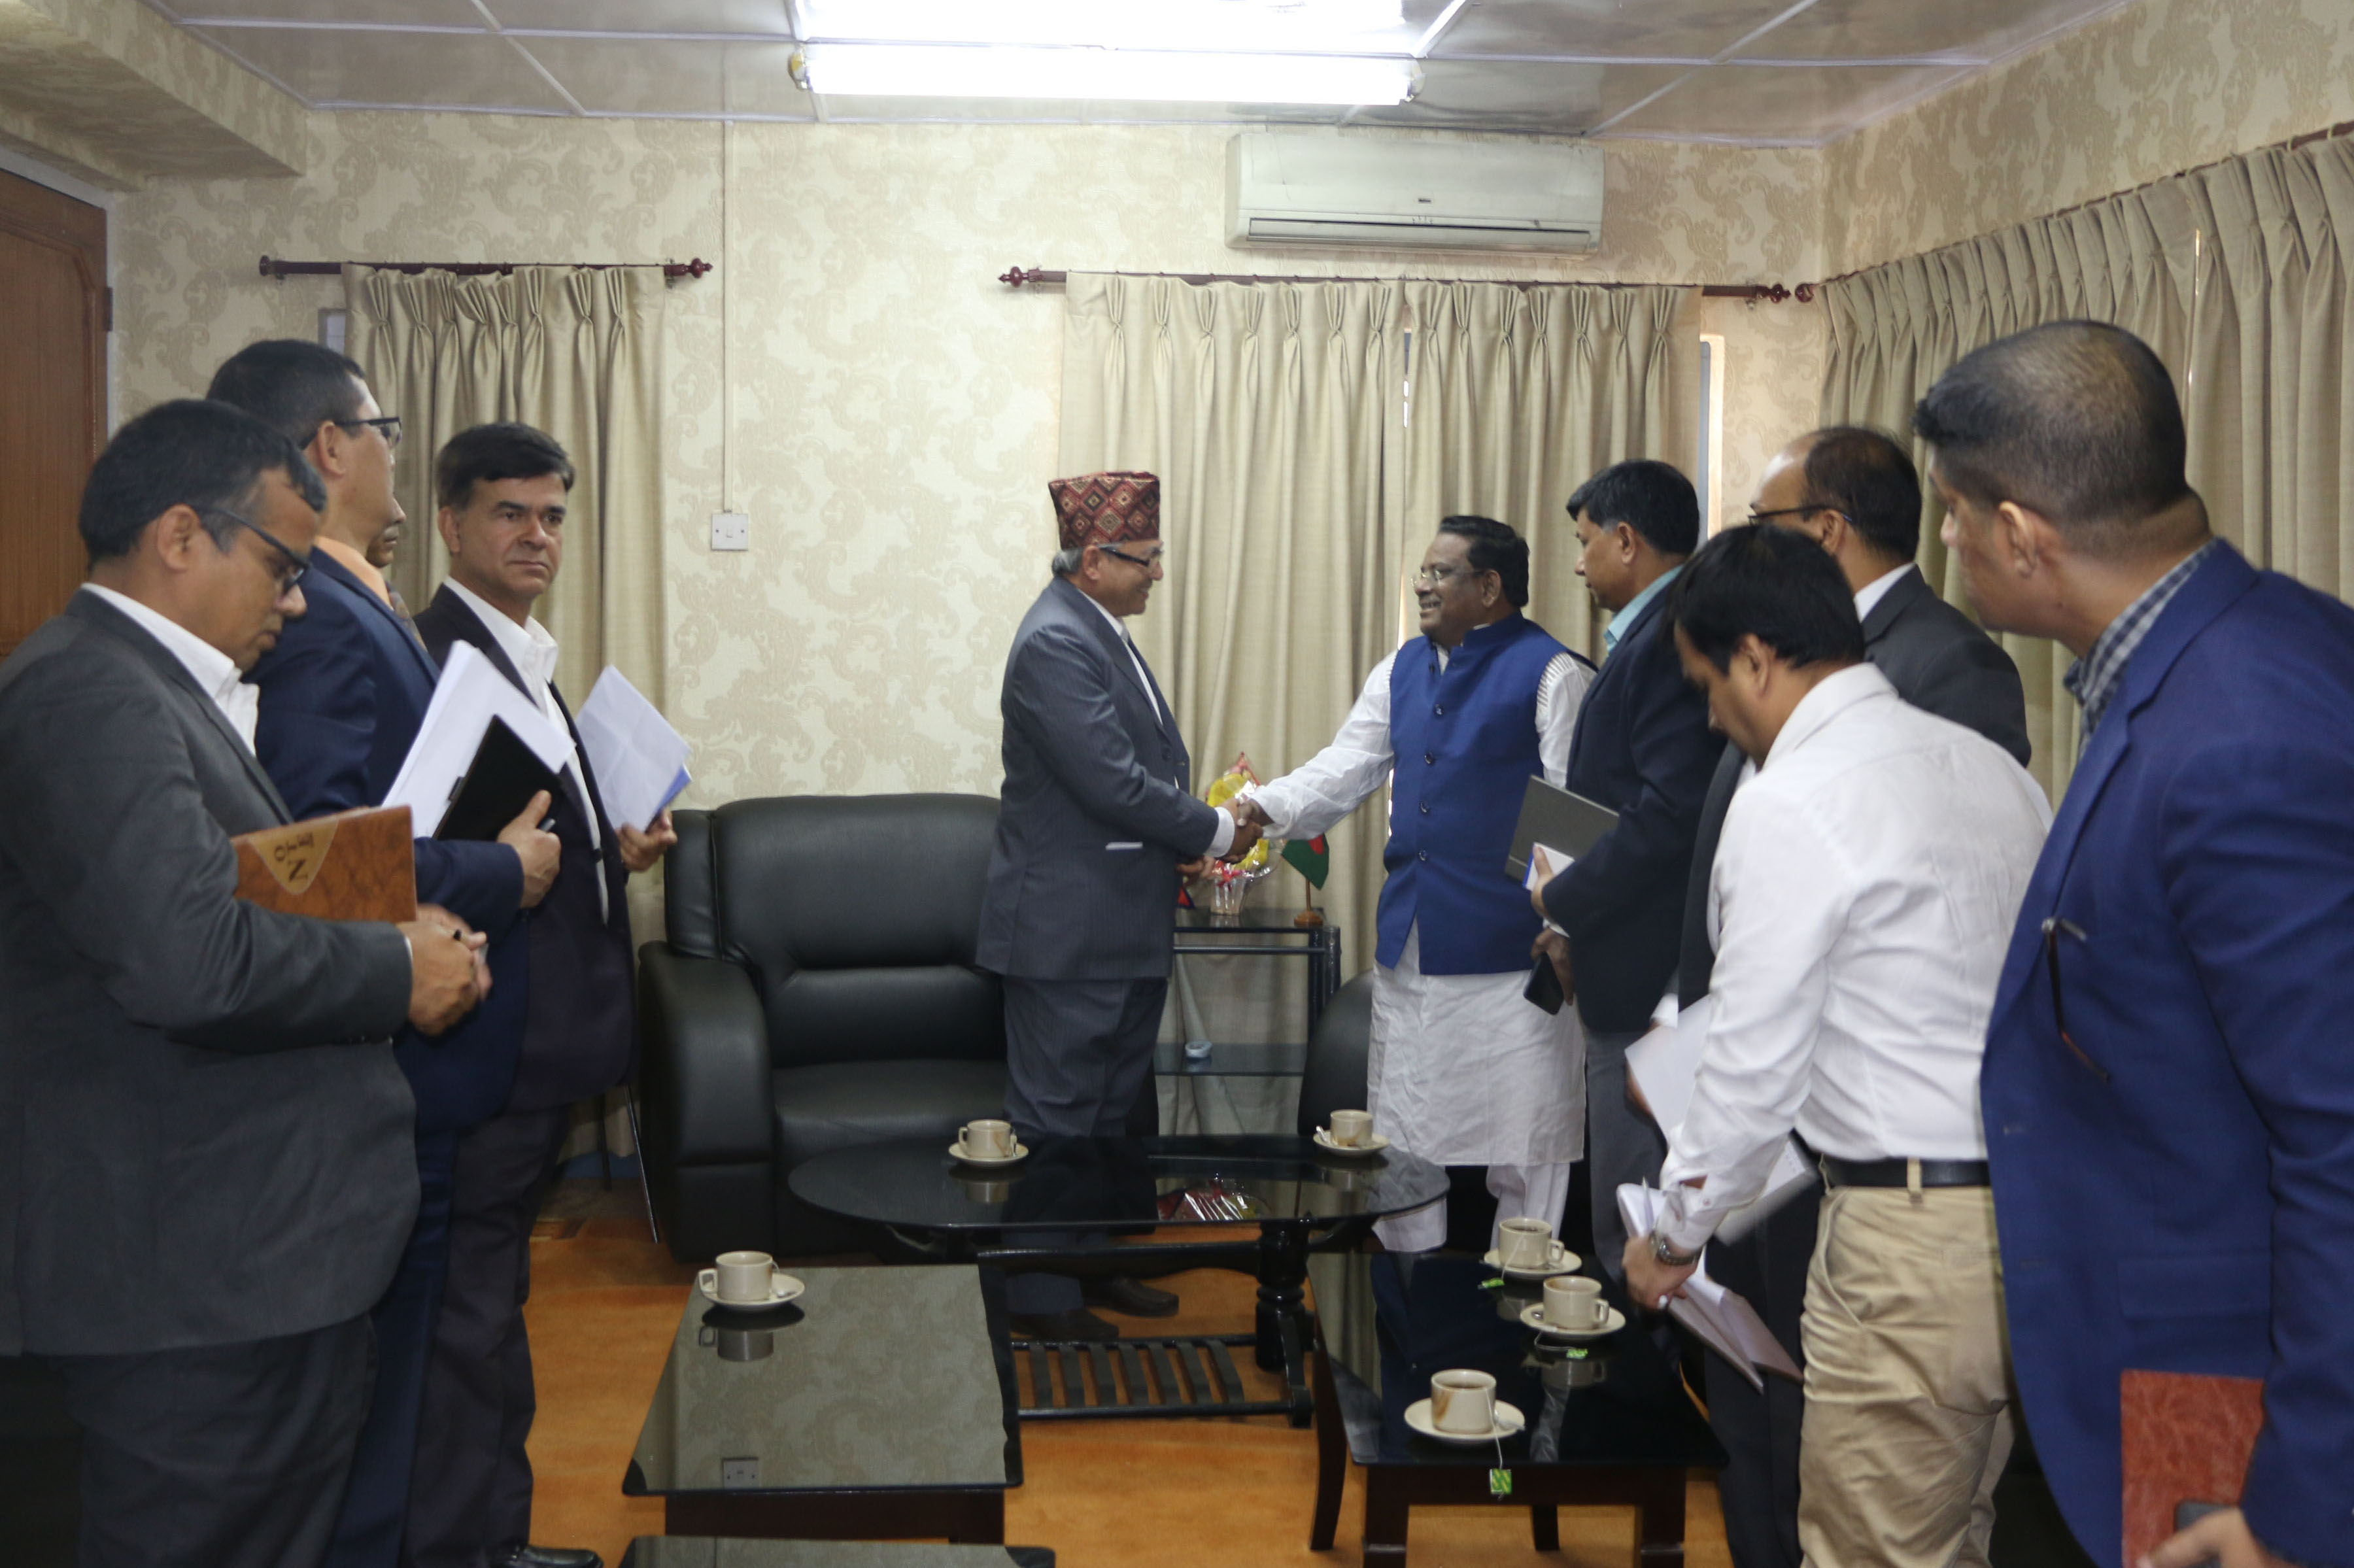 Minister for Civil Aviation and Tourism of Bangladesh, AKM Shahjahan Kamal along with the high-level delegation and Home Minister Ram Bahadur Thapa in a meeting held at Singha Durbar on Wednesday, March 14, 2018. Photo: Kiran Bhattarai/RSS